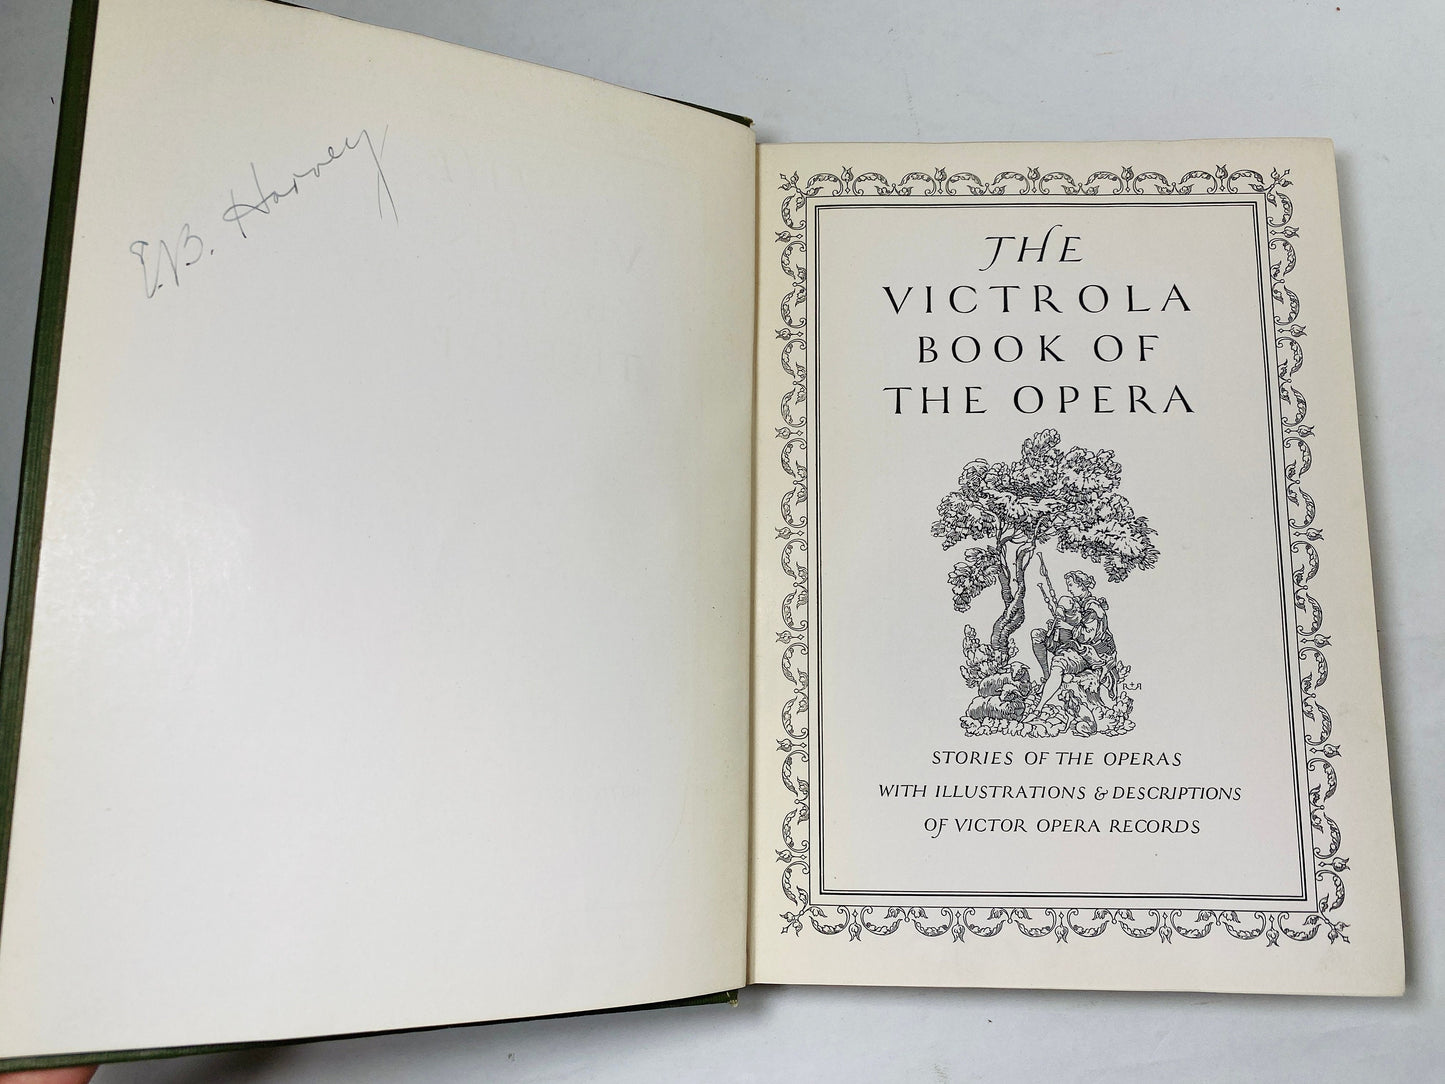 Antique Victrola Book of the Opera FIRST EDITION vintage book circa 1924 Beautifully illustrated green and gold decor.